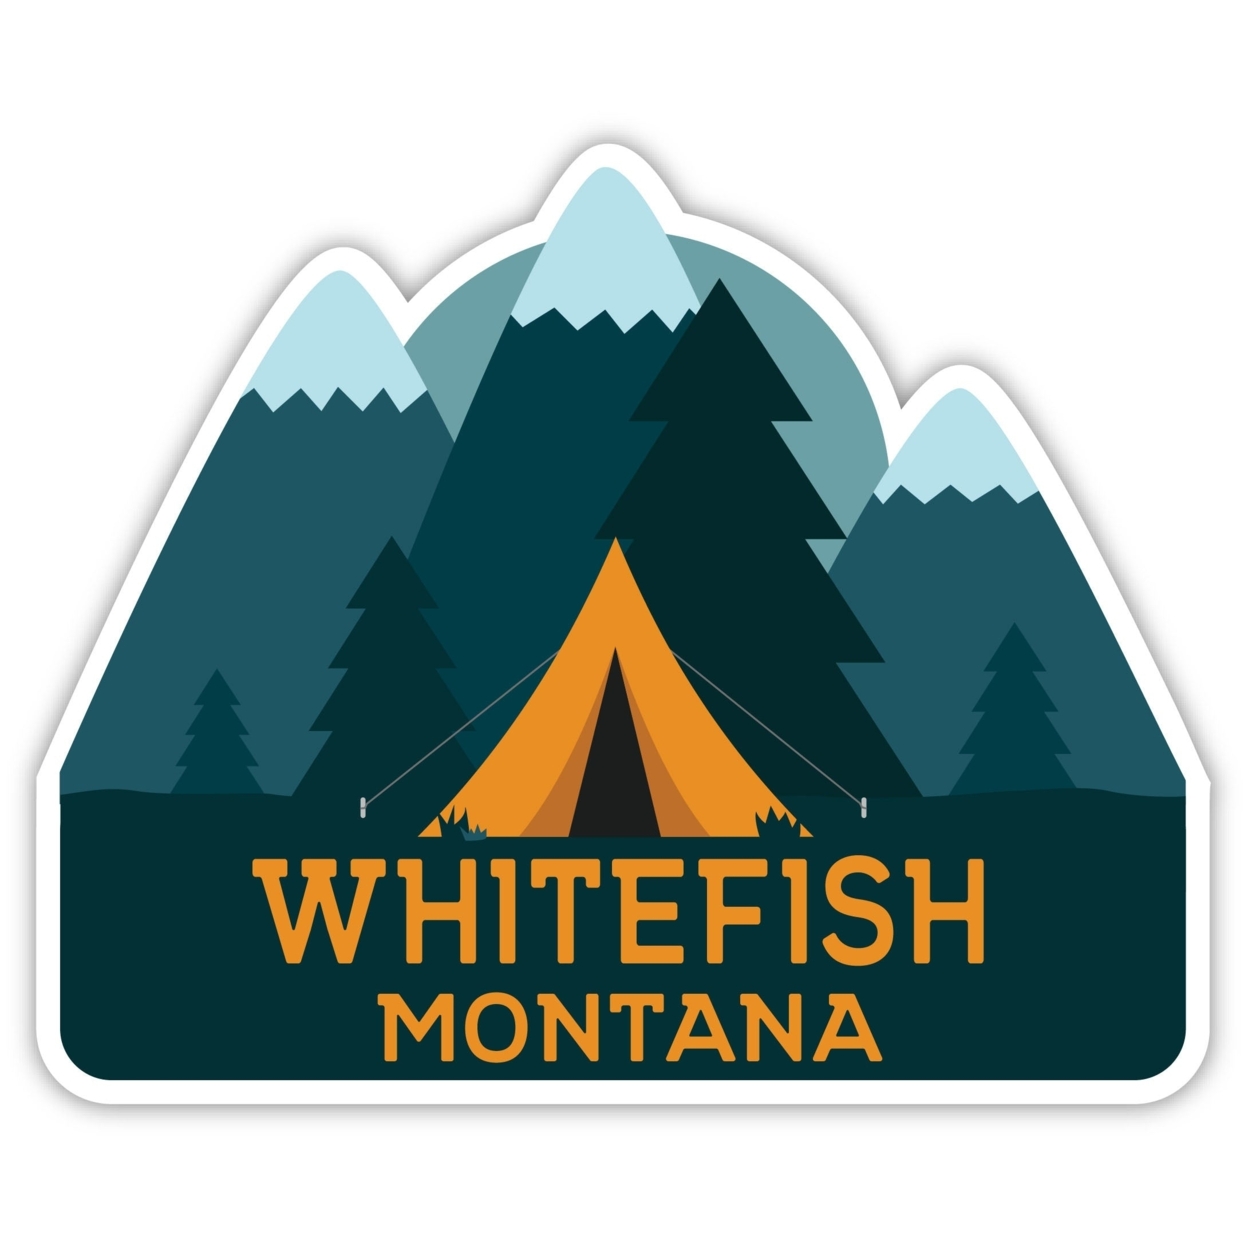 Whitefish Montana Souvenir Decorative Stickers (Choose Theme And Size) - Single Unit, 2-Inch, Camp Life